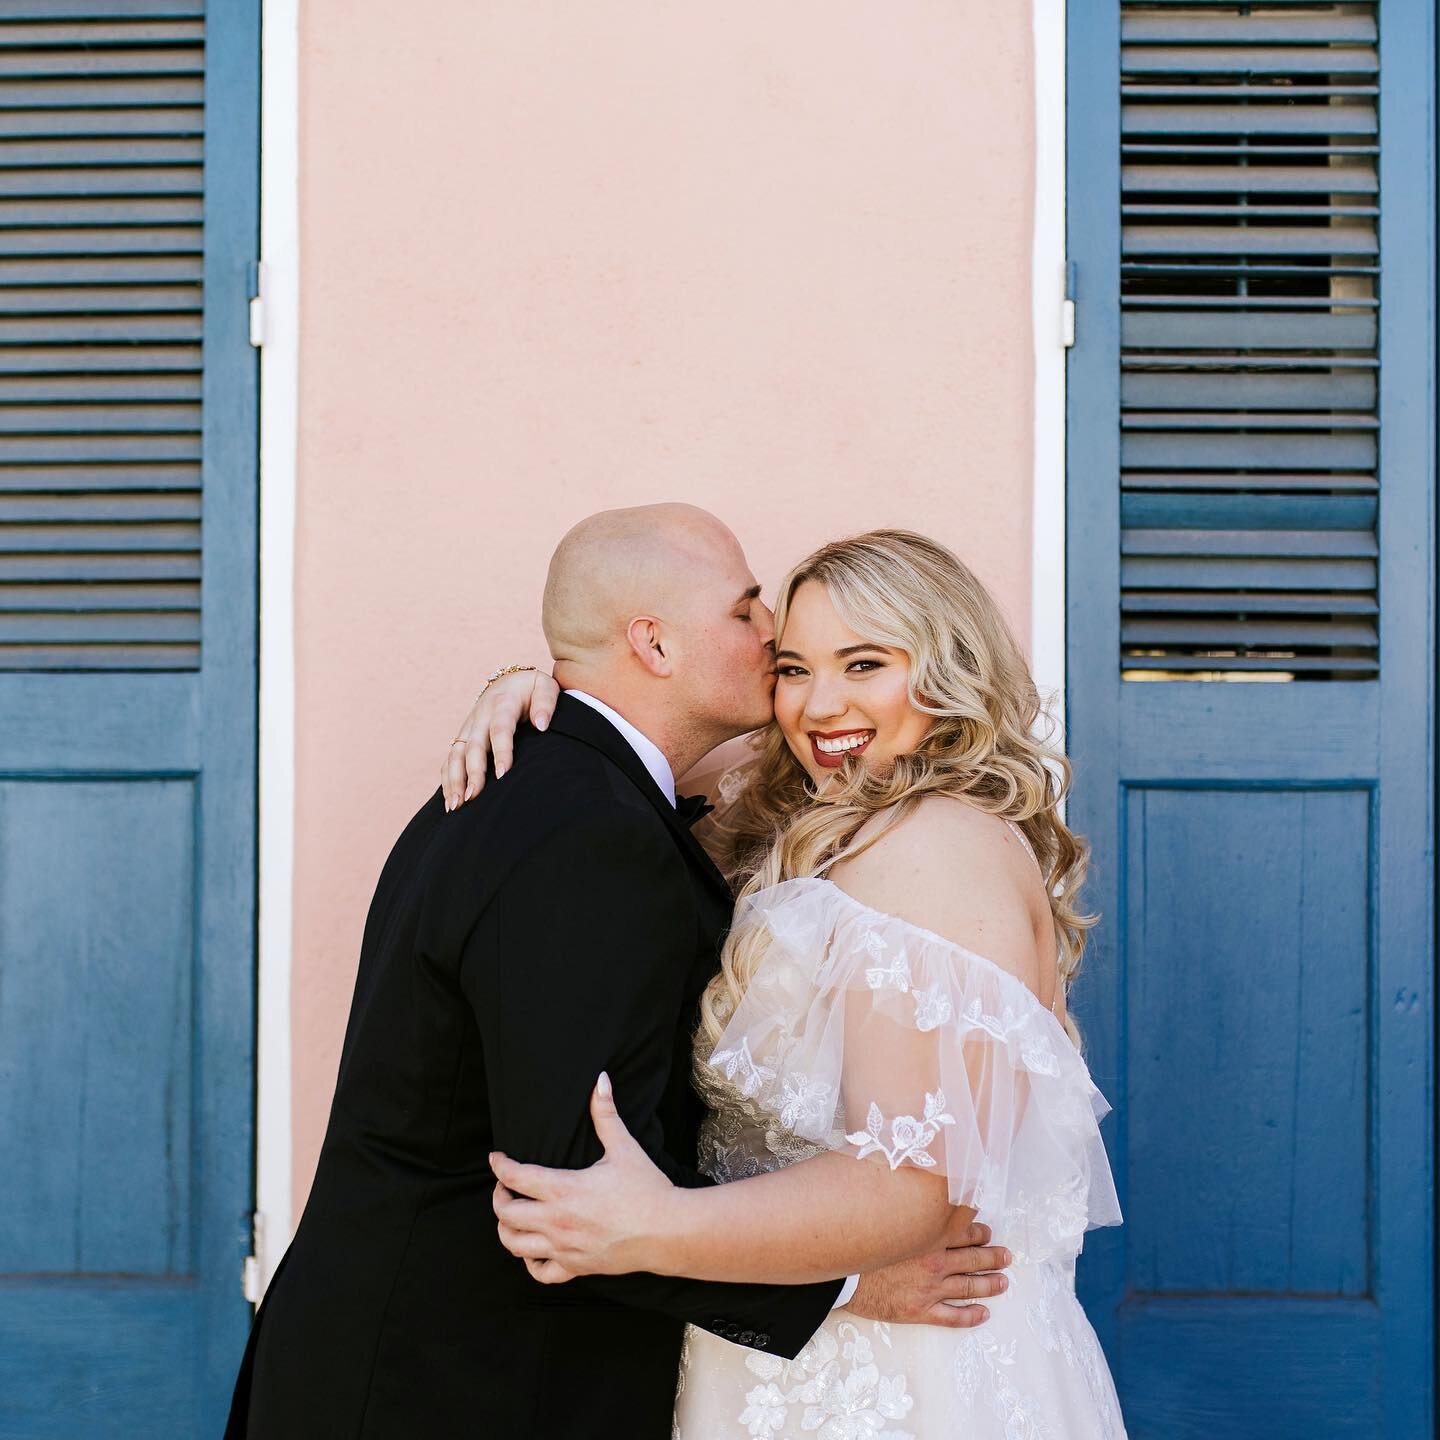 Taylor and Michael, I know it&rsquo;s only been a month but please come back and hang out in Nola! I miss y&rsquo;all already. Thank goodness our last hang was the best day ever 🥰

Planning: @lizziembfrederick @theuncommoncamellia 
MUA: @glamtogeaux